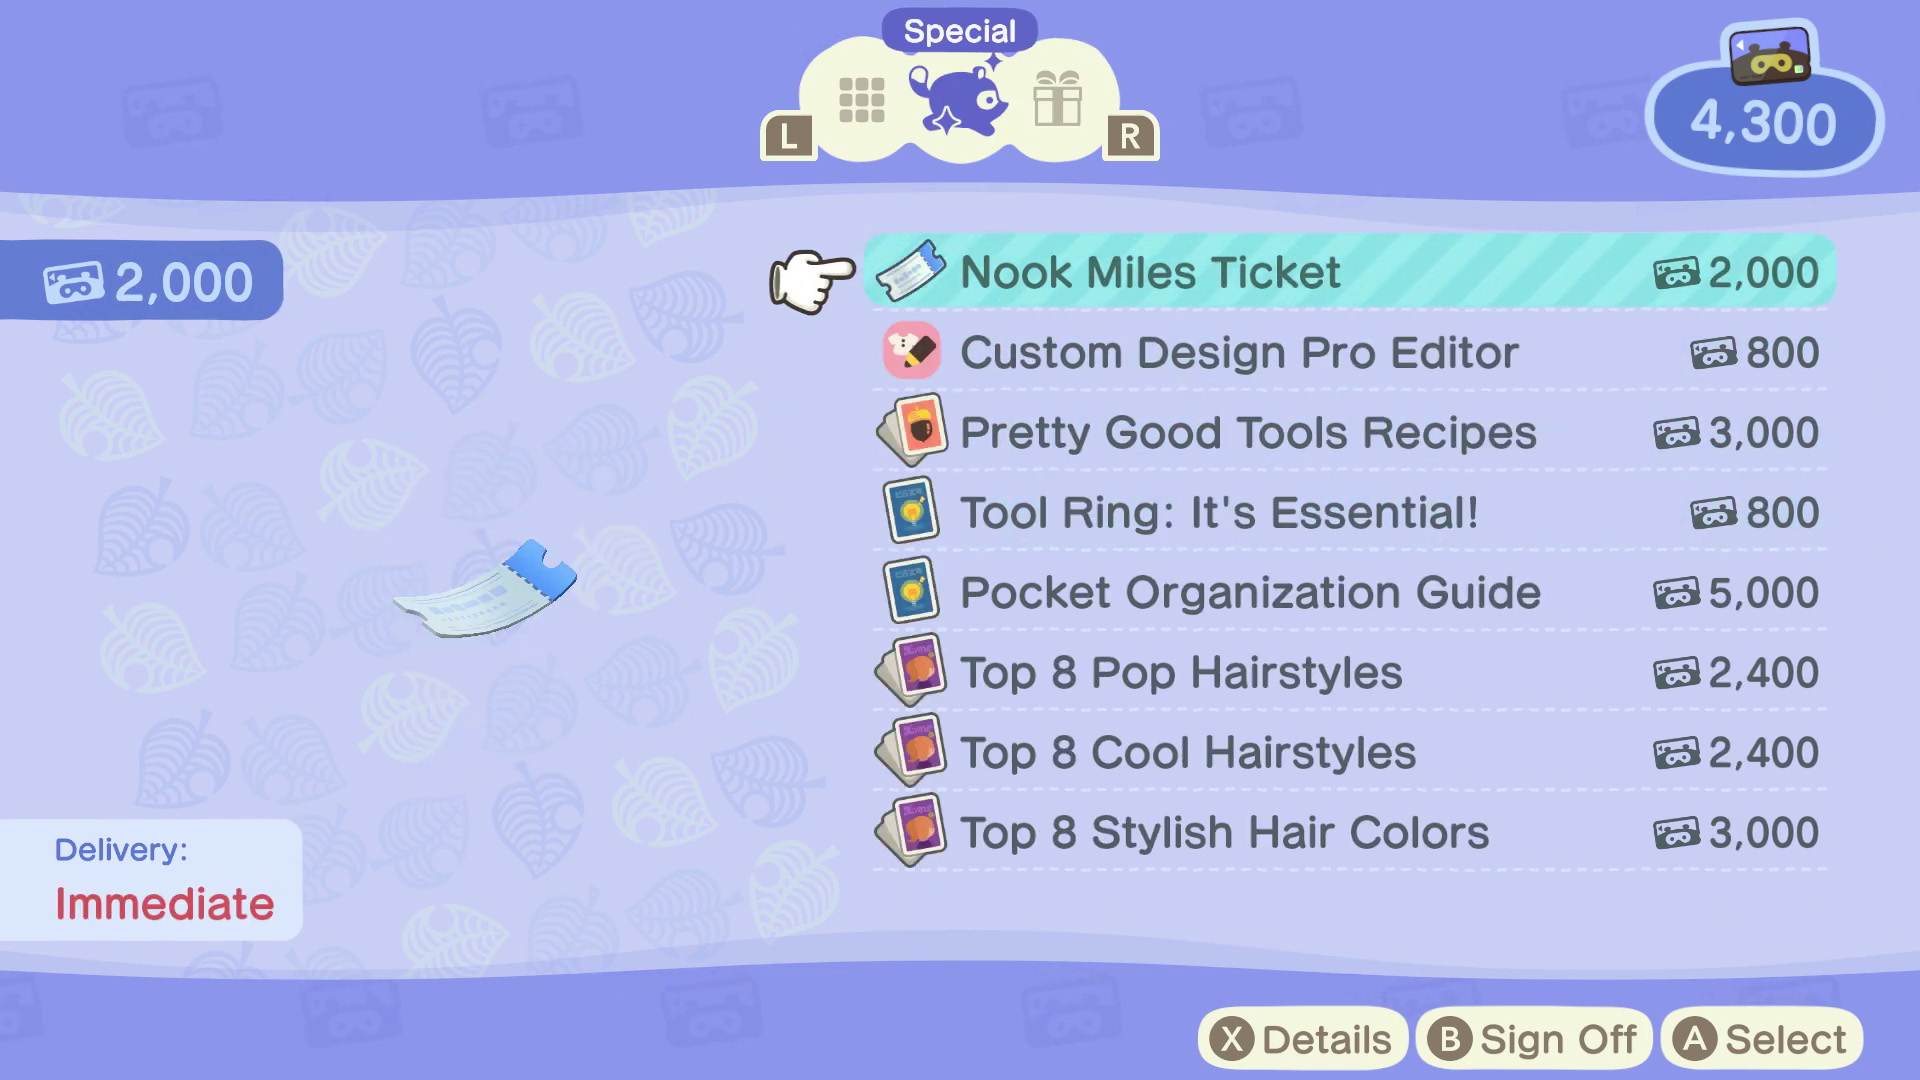 How To Get Iron Nuggets For Crafting Tools Nook S Cranny In Animal Crossing New Horizons - roblox islands value list price guide for selling buying items pro game guides